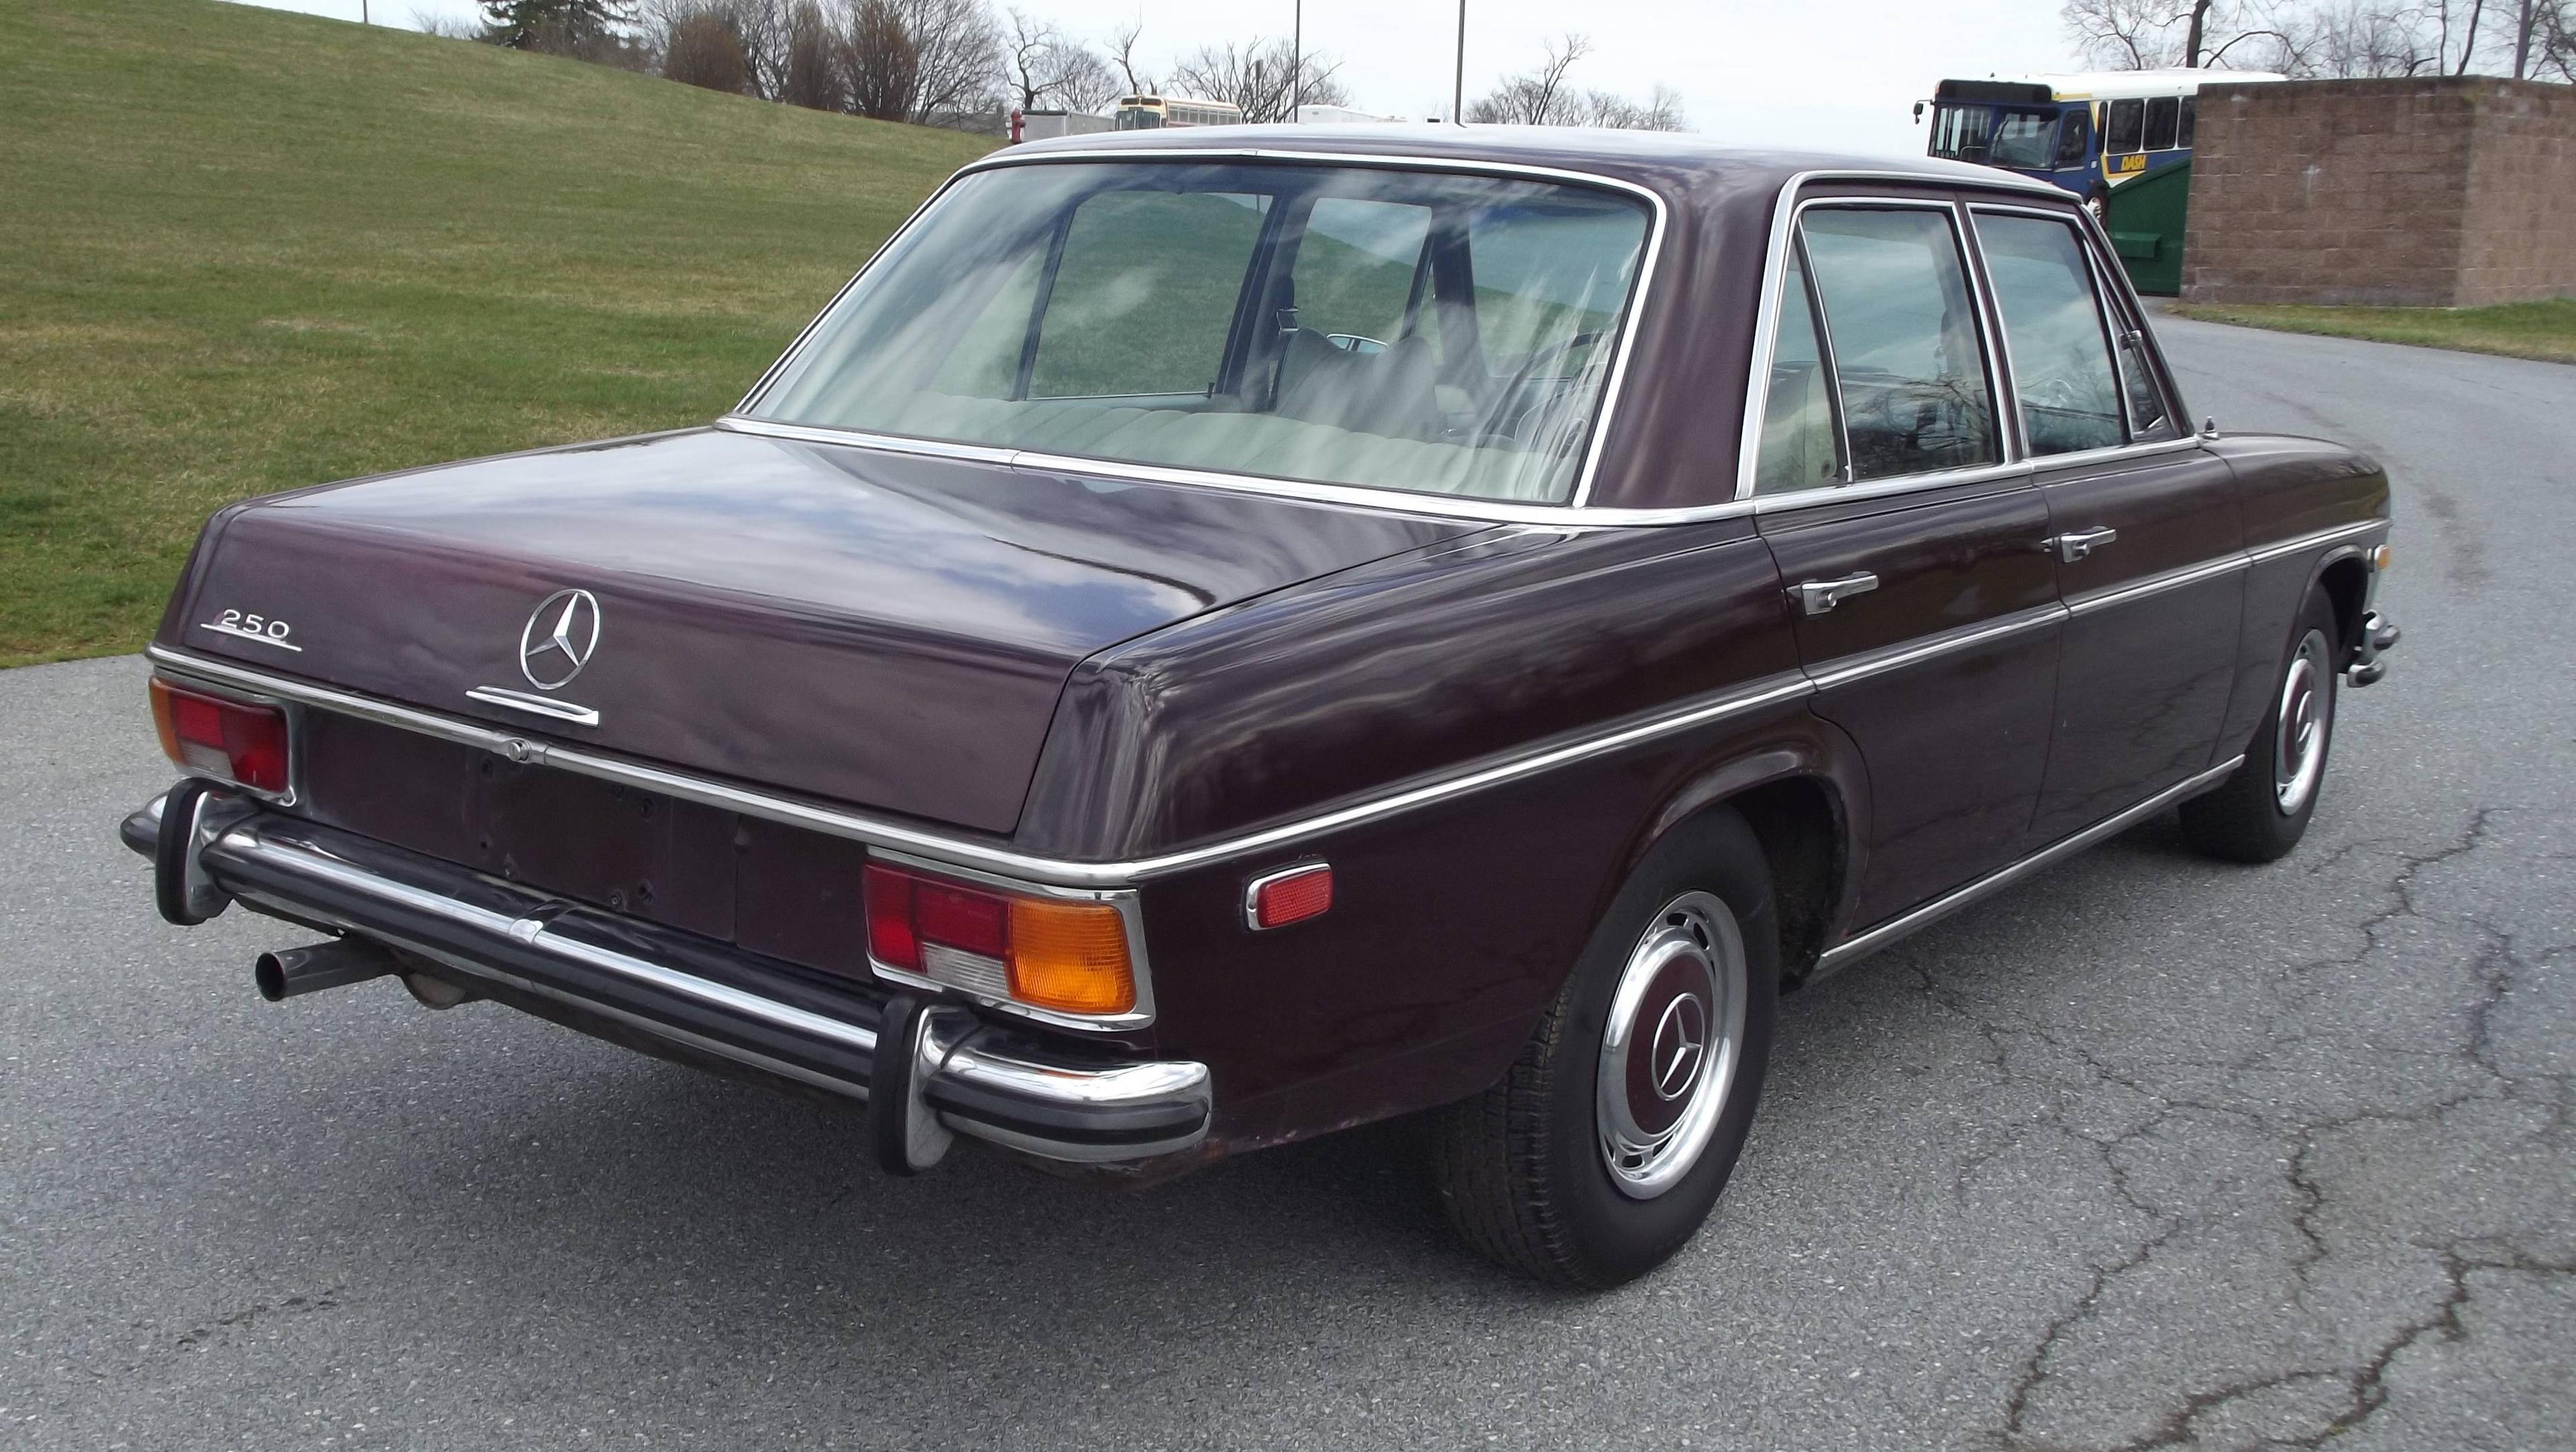 1970 Mercedes-Benz 250 Sedan.Runs and drives.Has been sitting for a while a